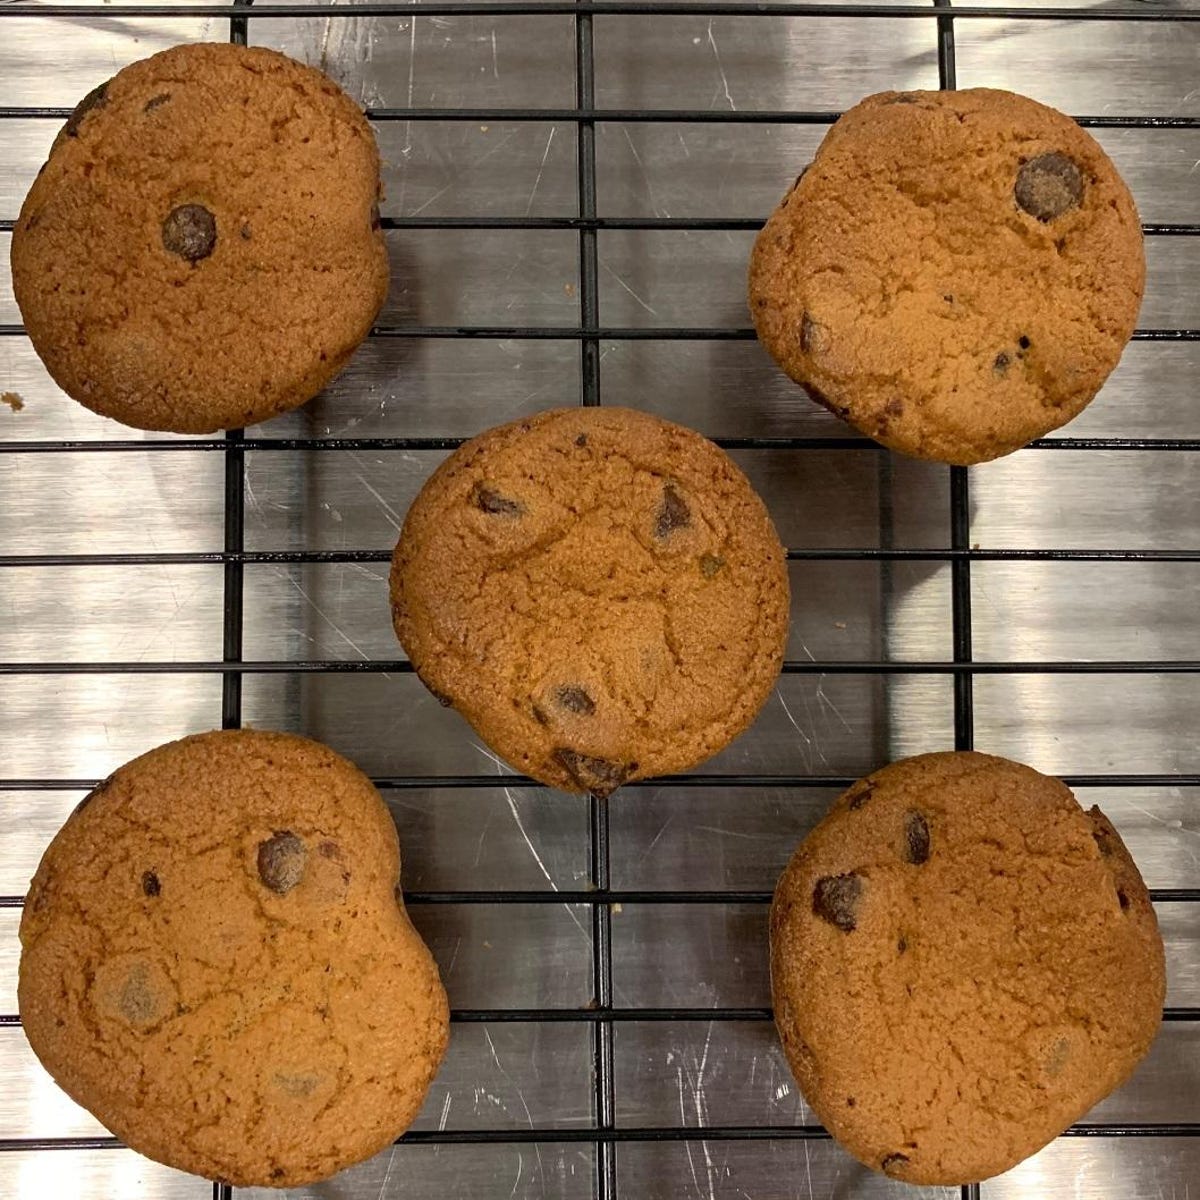 black-and-decker-toaster-oven-cookies-11-minutes